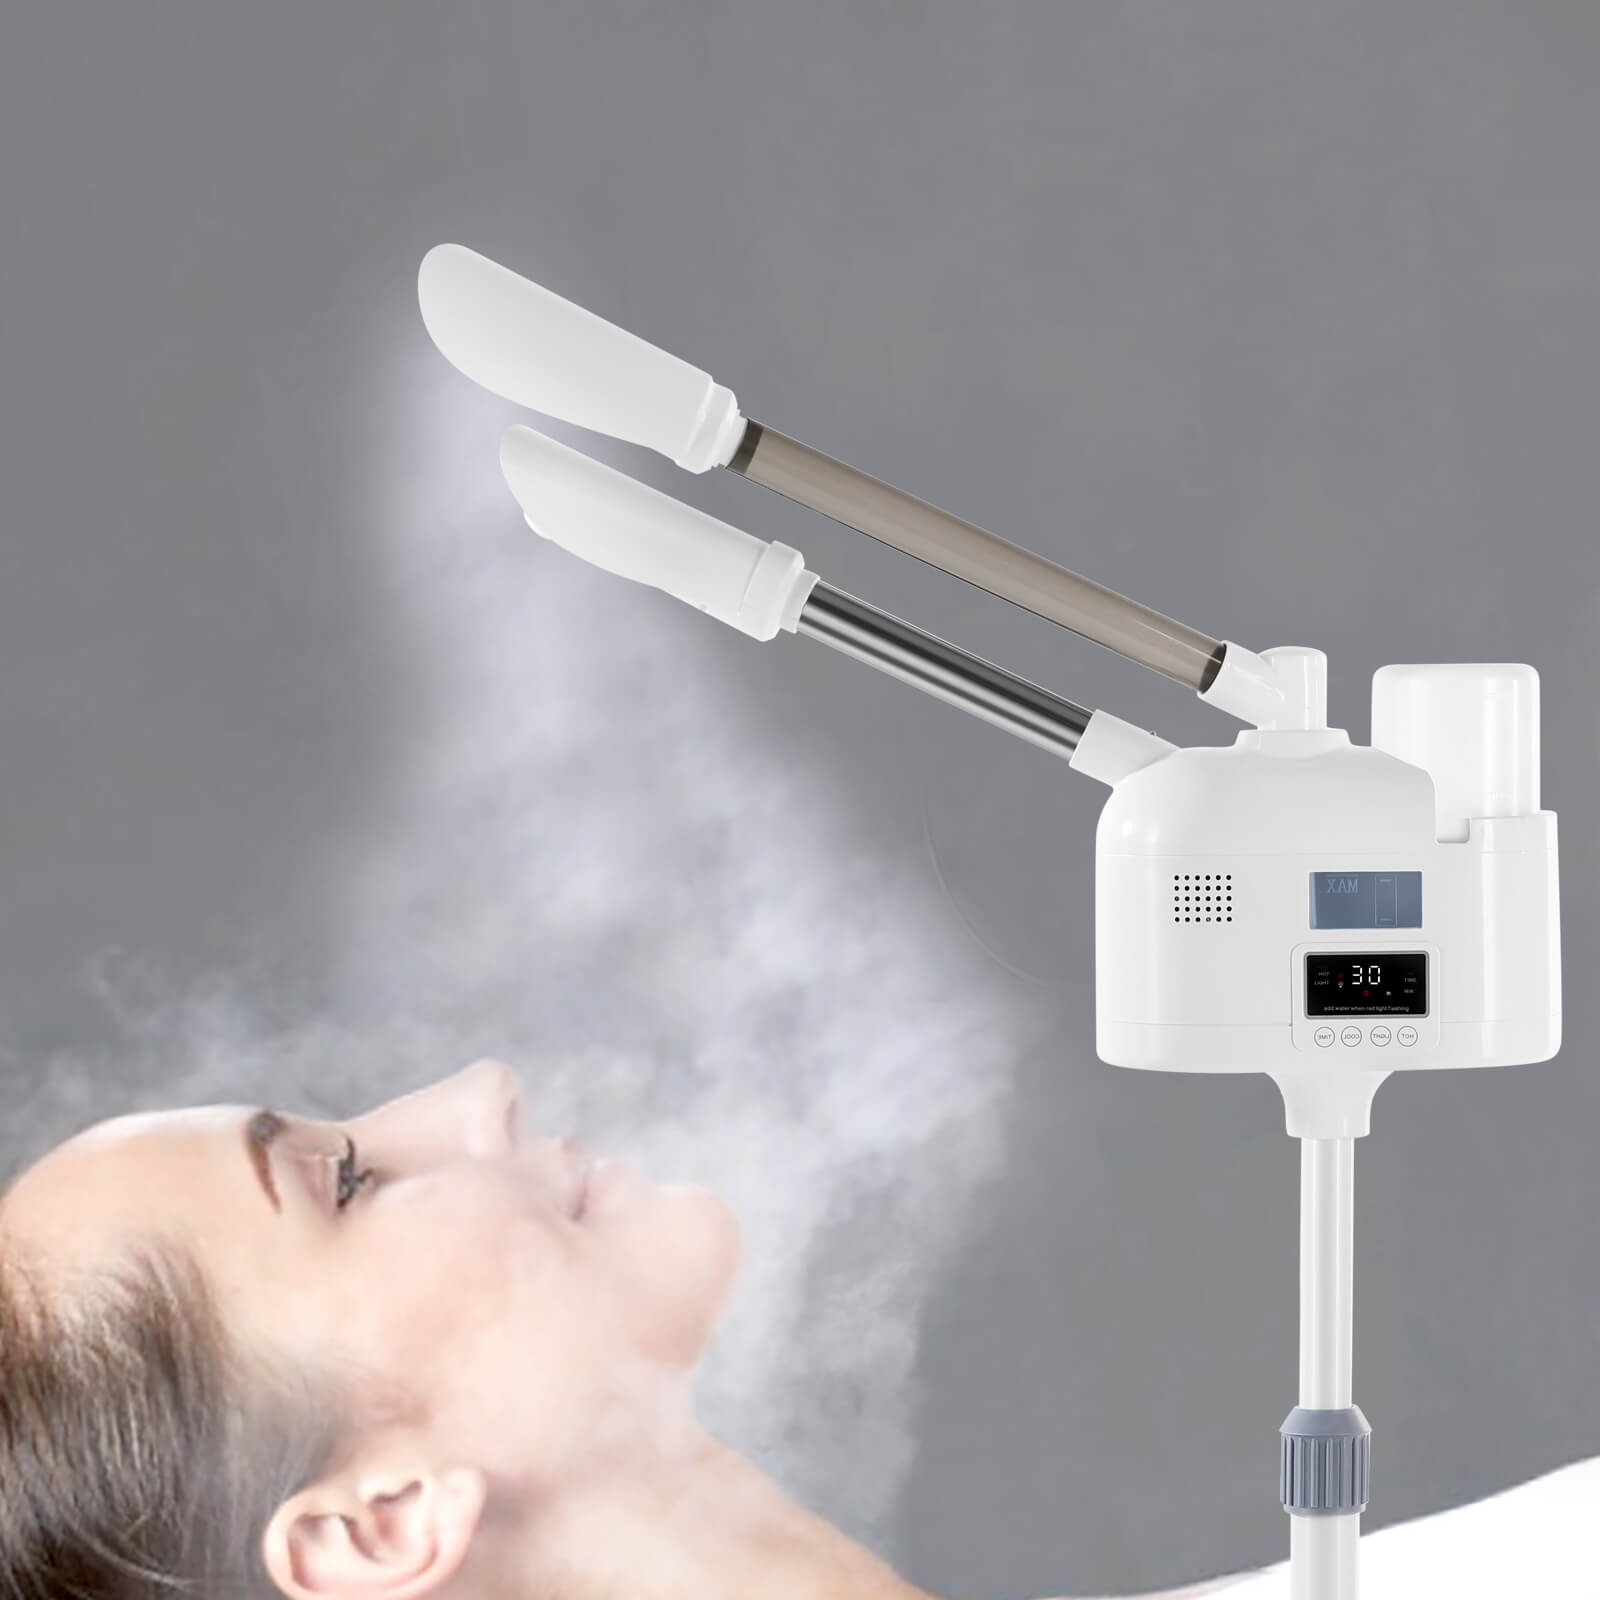 #4016 Professional 2 in 1 Facial Steamer with hot & cold nozzle